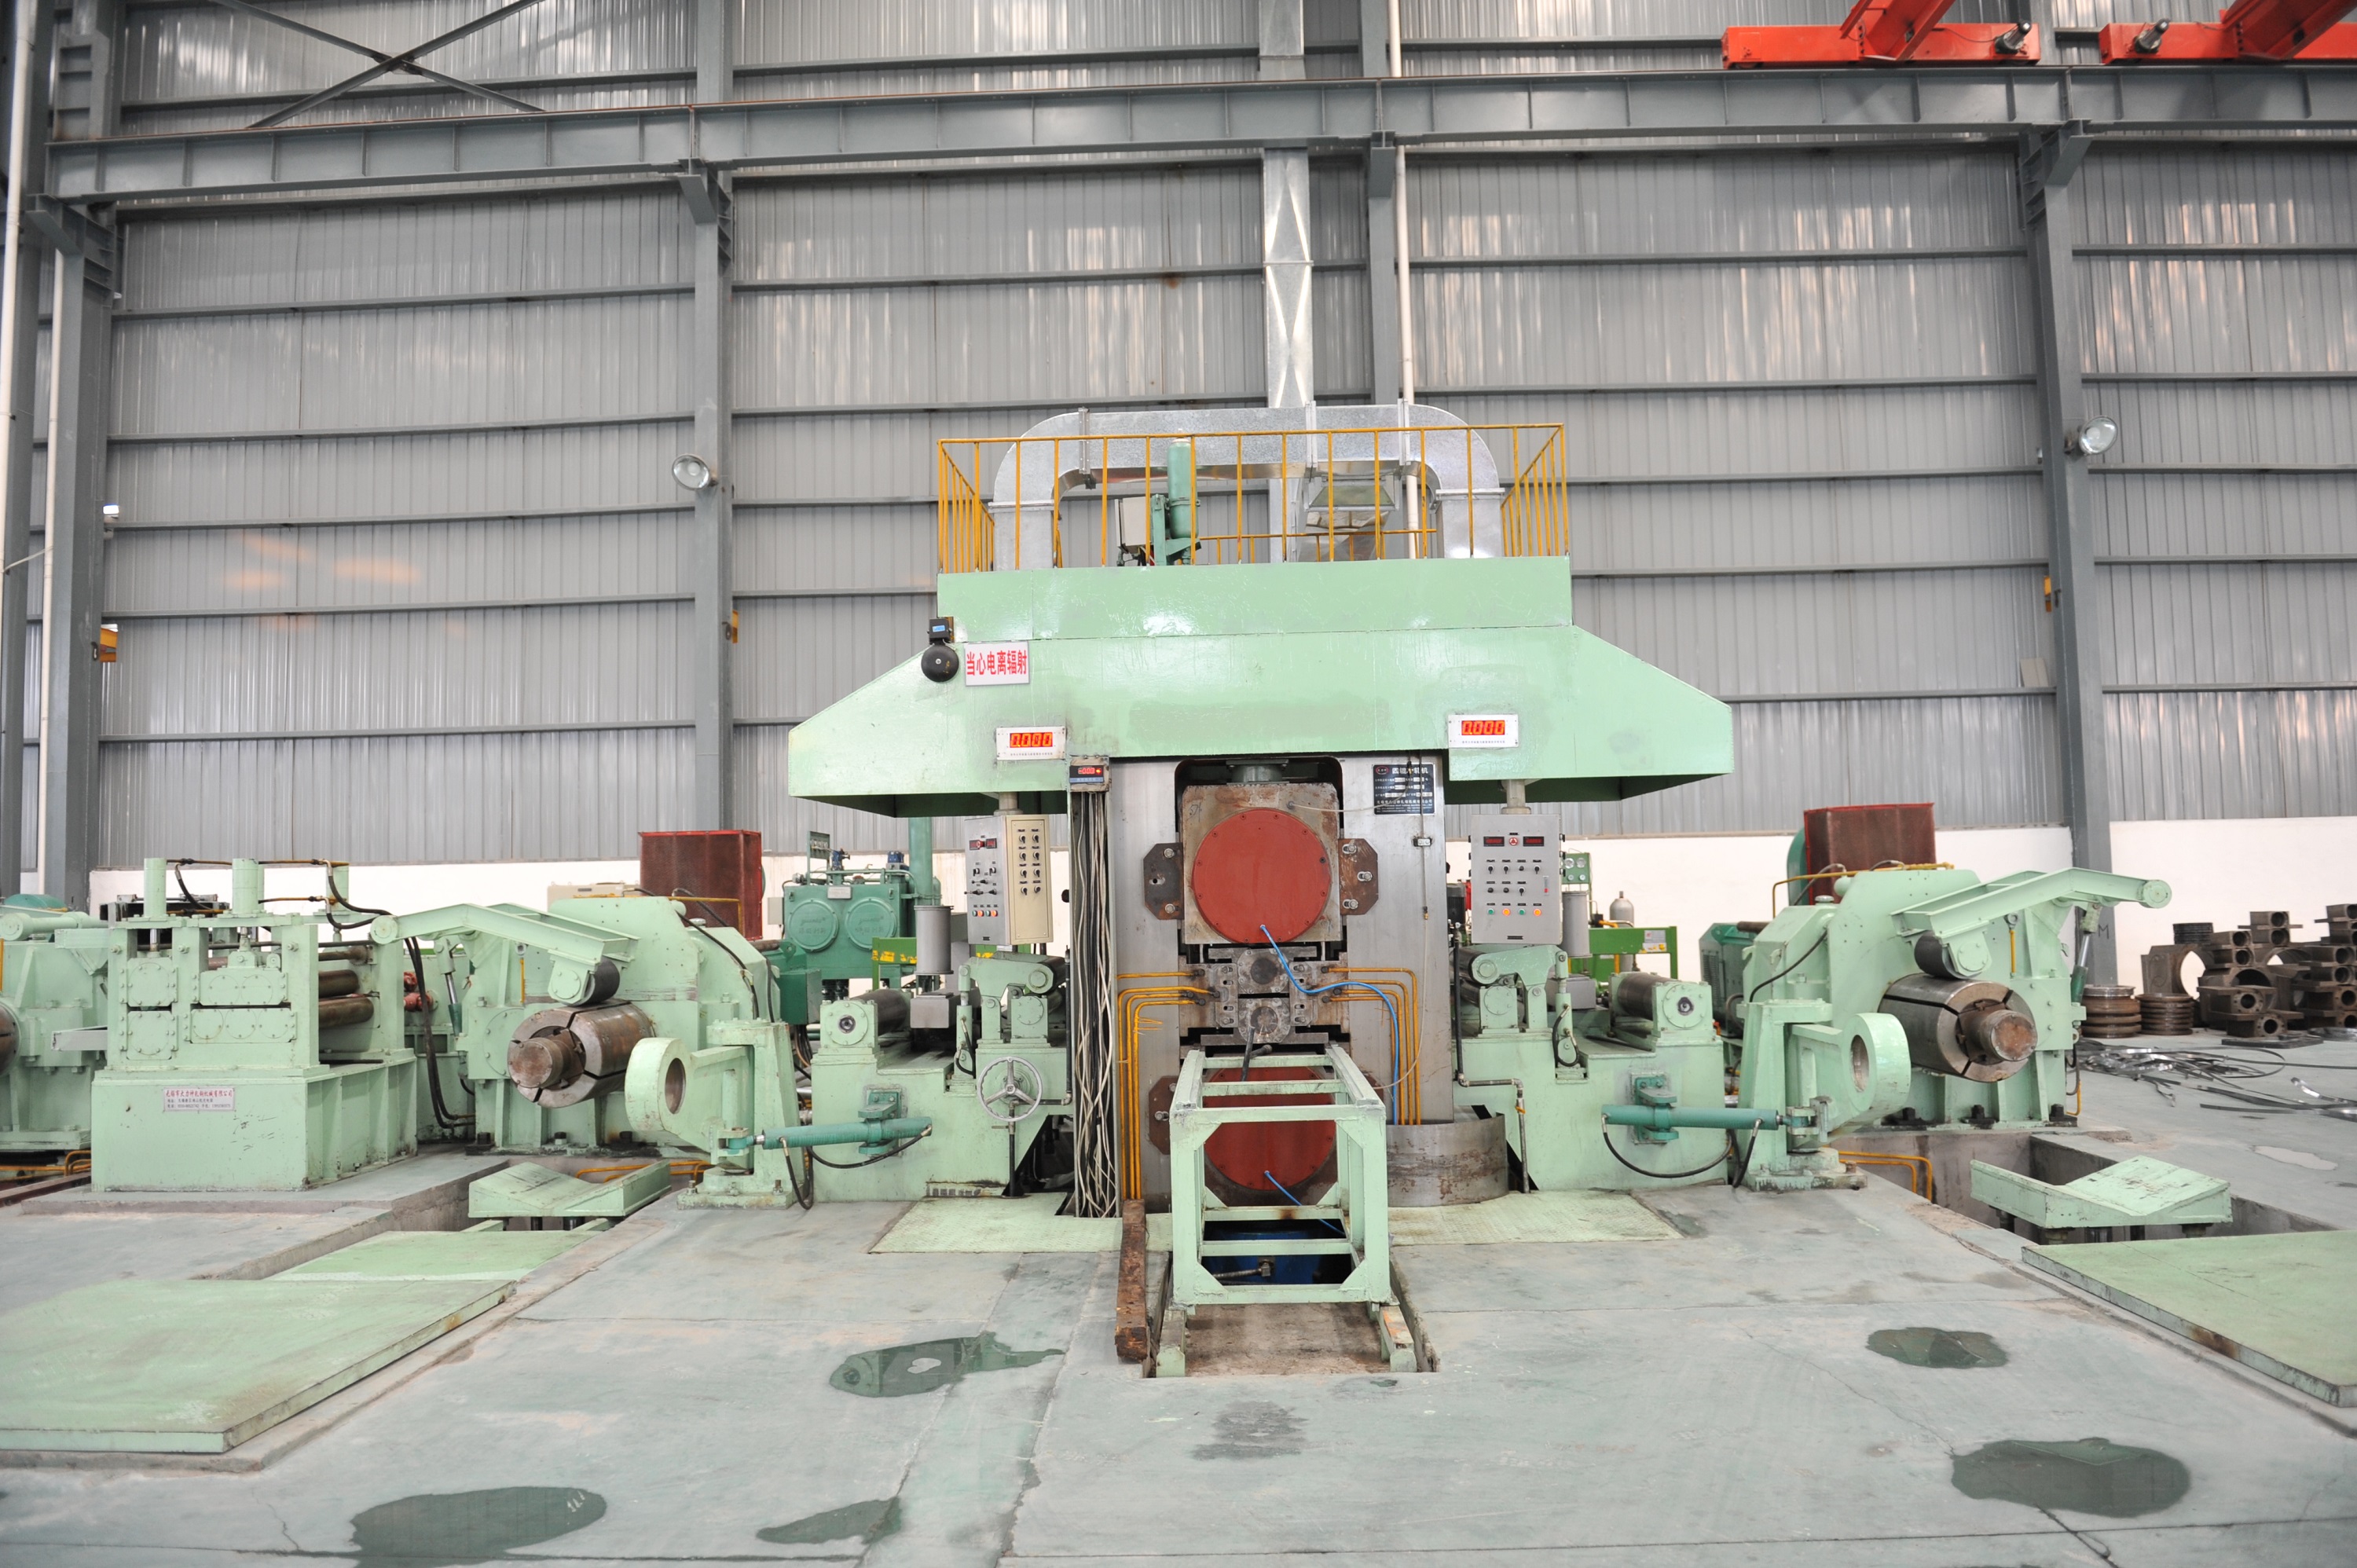 Four-high reversing cold rolling mill